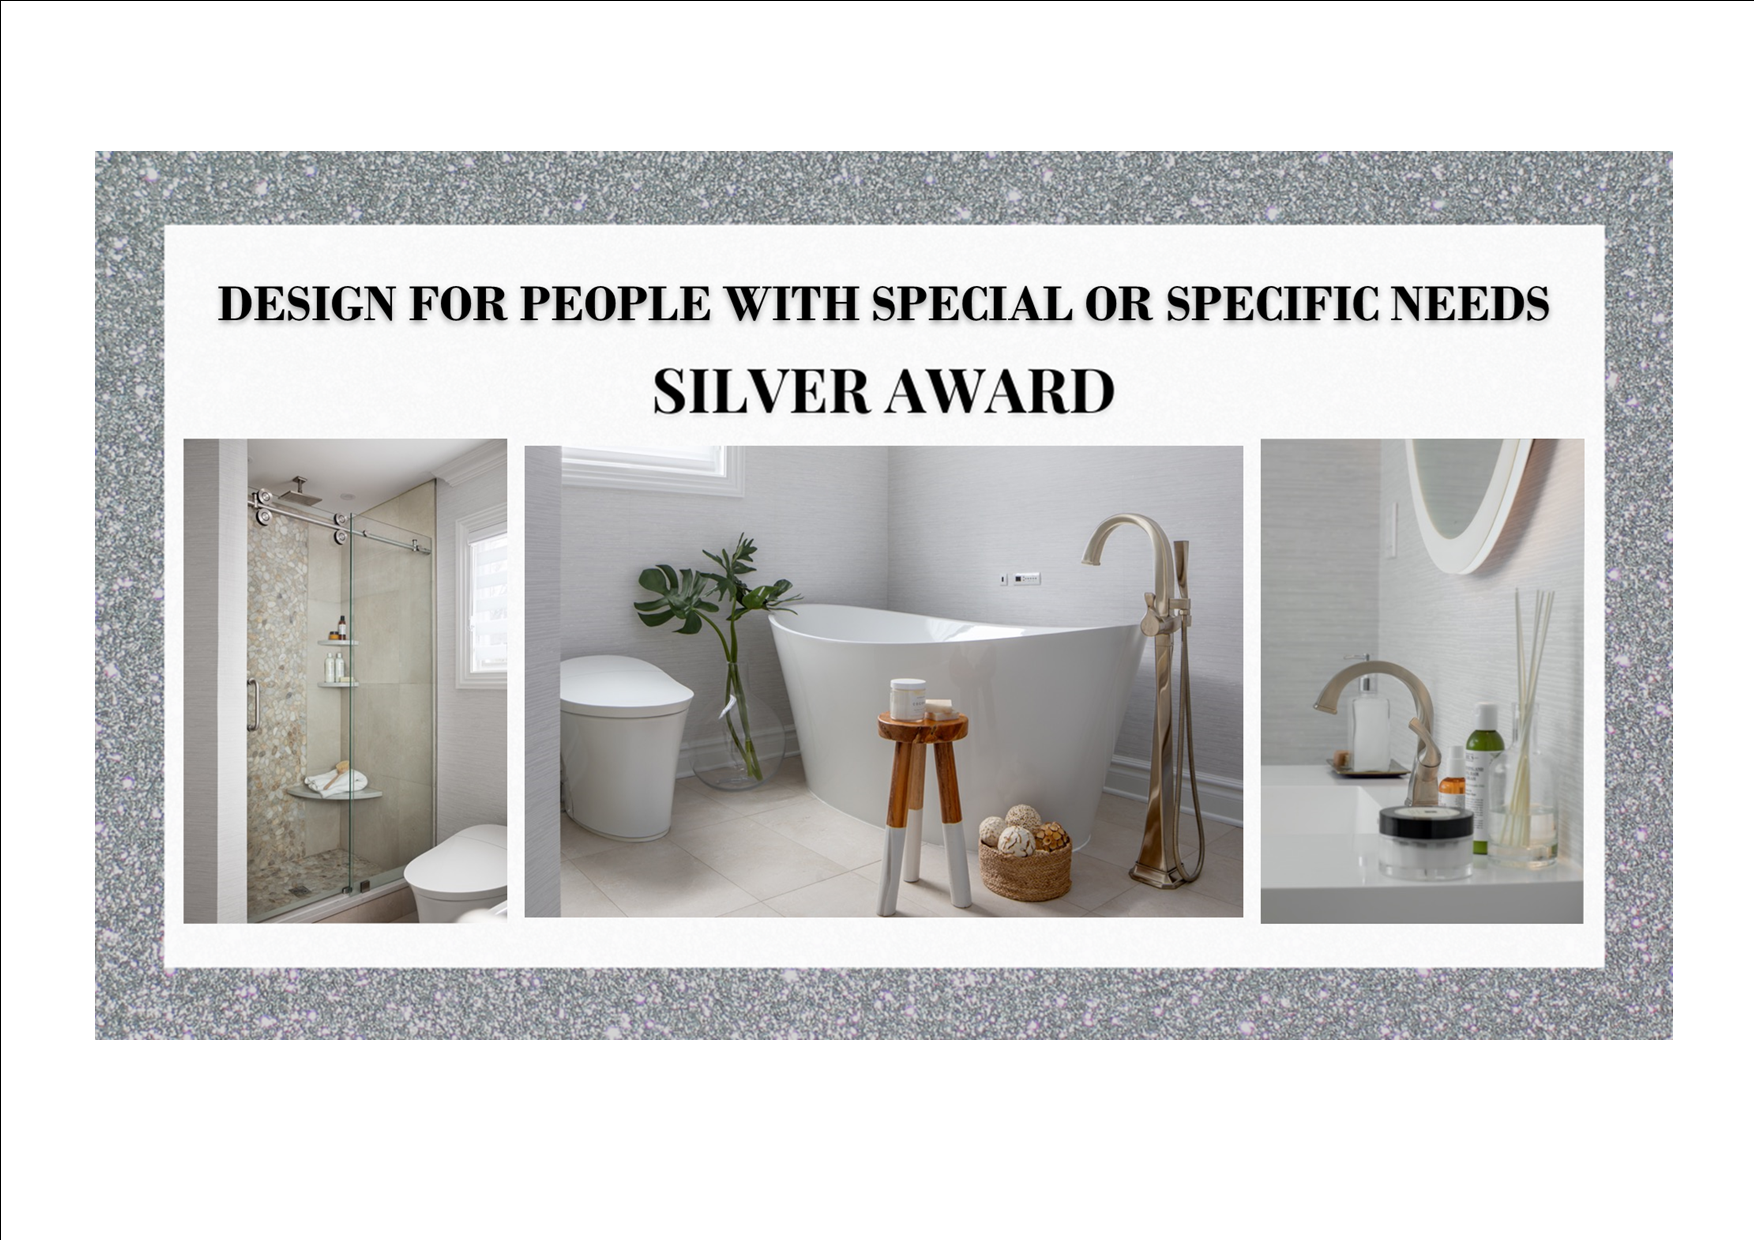 Silver Award Design for People with Special or Specific Needs